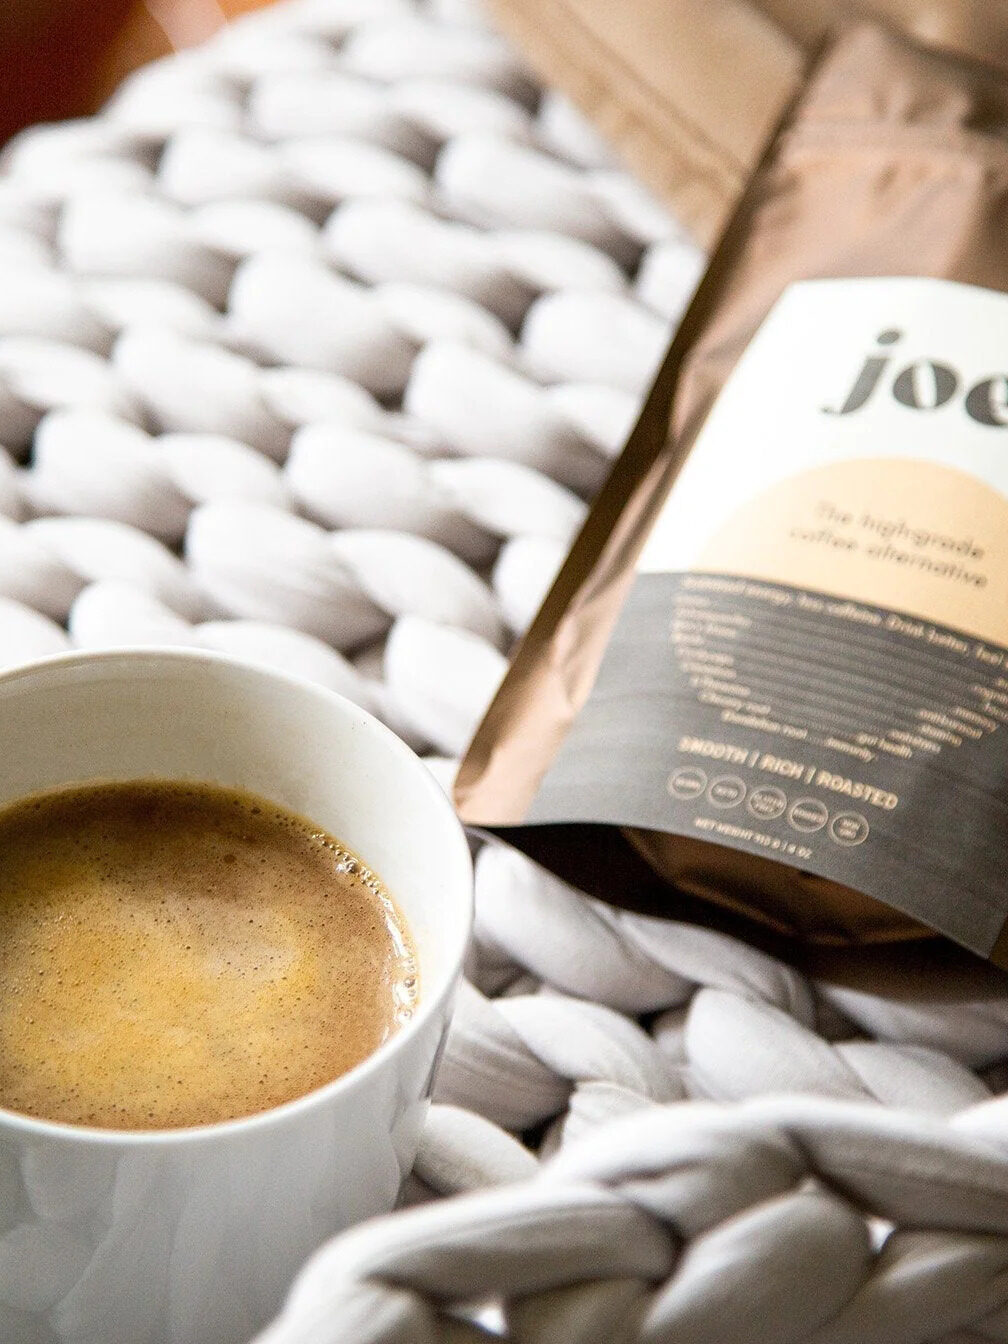 A pack of Joe'y coffee alternative laid flat with a brewed cup of the blend in front of it.